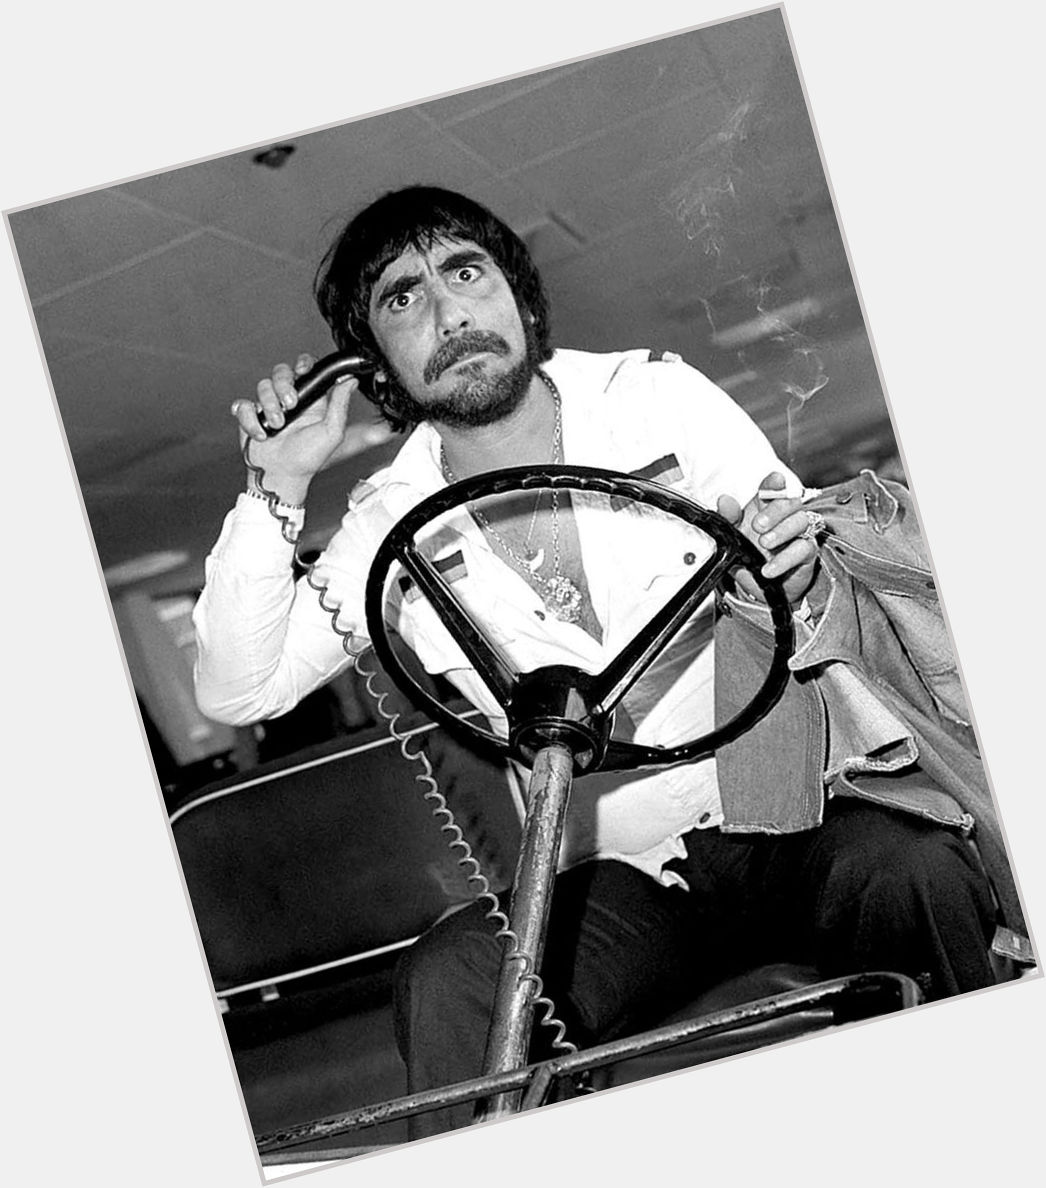 HAPPY BIRTHDAY Moonie!!

Gone but Never Forgotten.

RIP Keith Moon. 